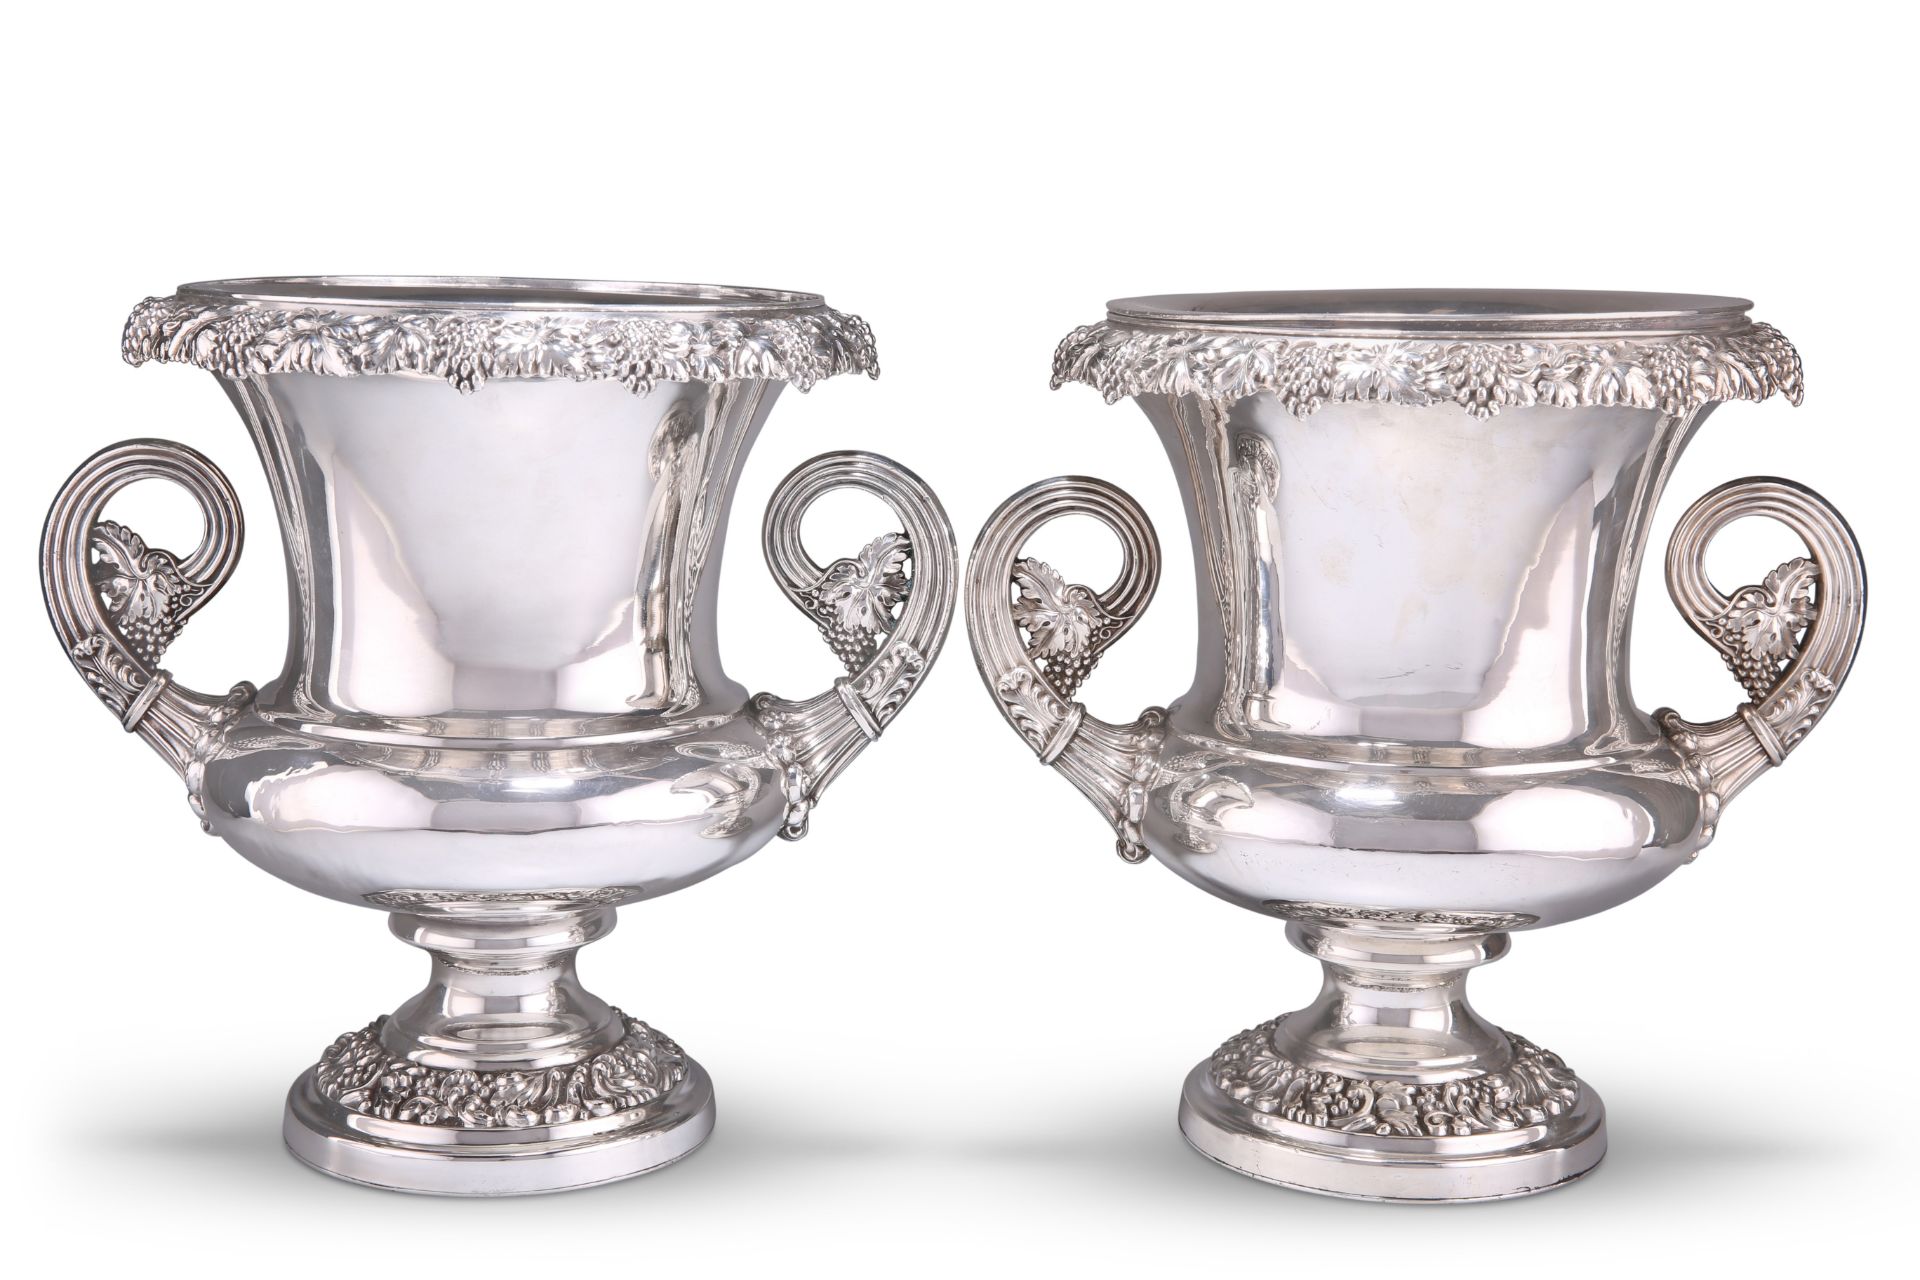 A MATCHED PAIR OF OLD SHEFFIELD PLATE WINE COOLERS - Image 2 of 3